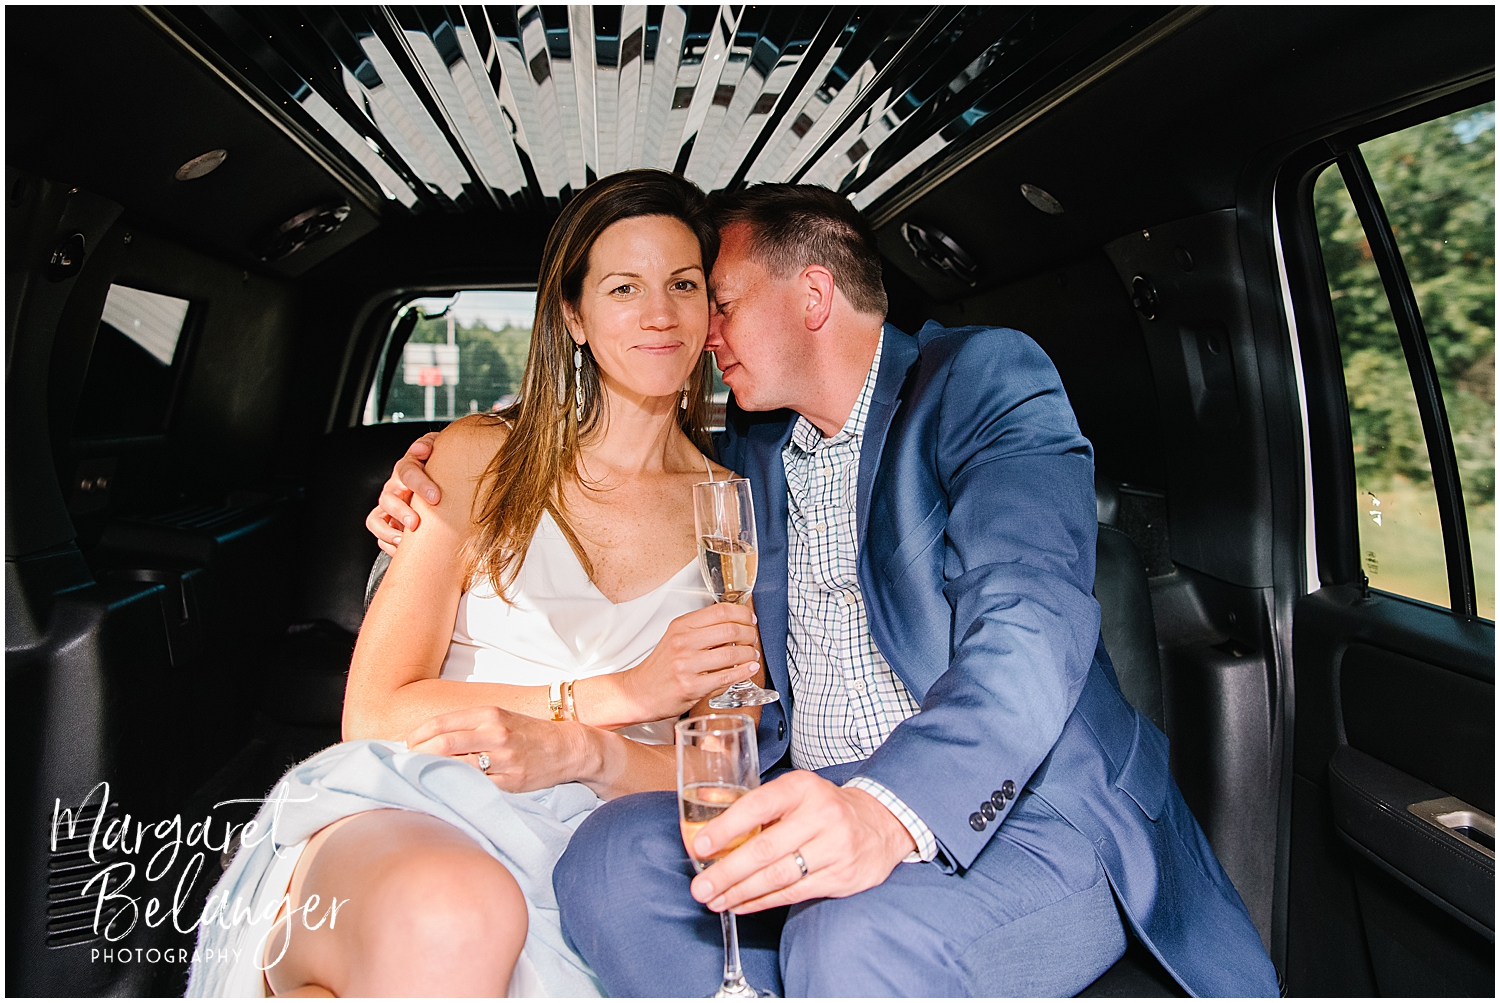 The groom nuzzles the bride in the back of the limousine while they hold flutes of champagne.